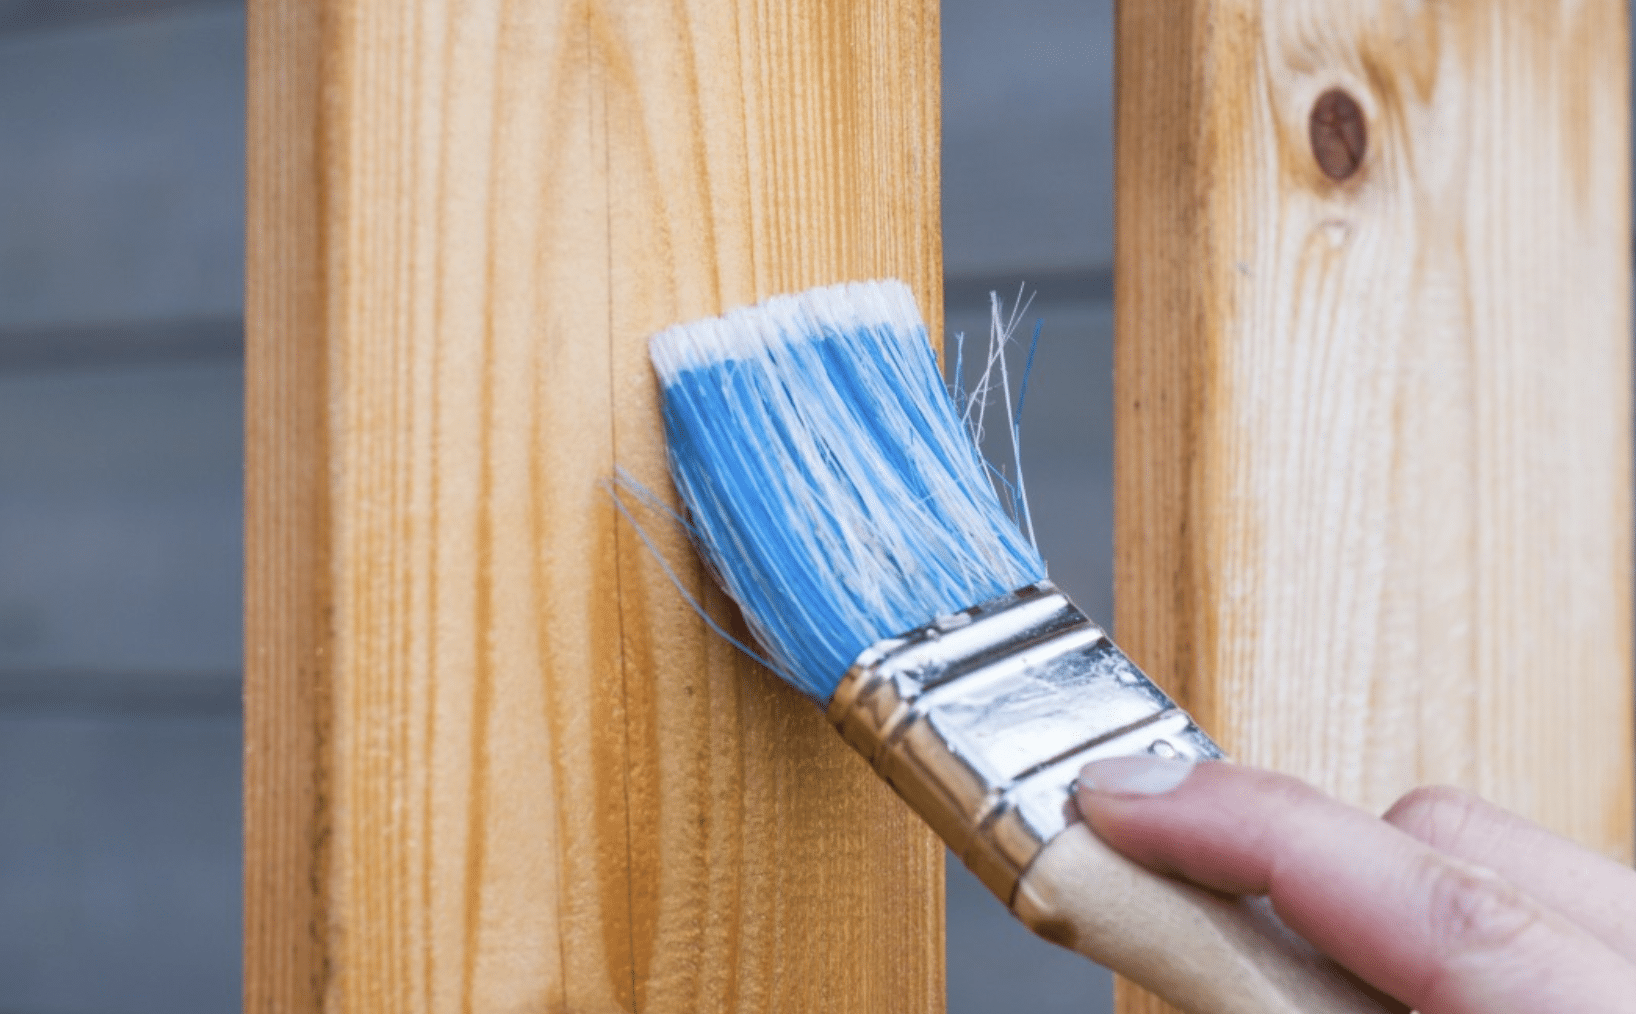 Landlord DIY Projects to Add Value to Their House